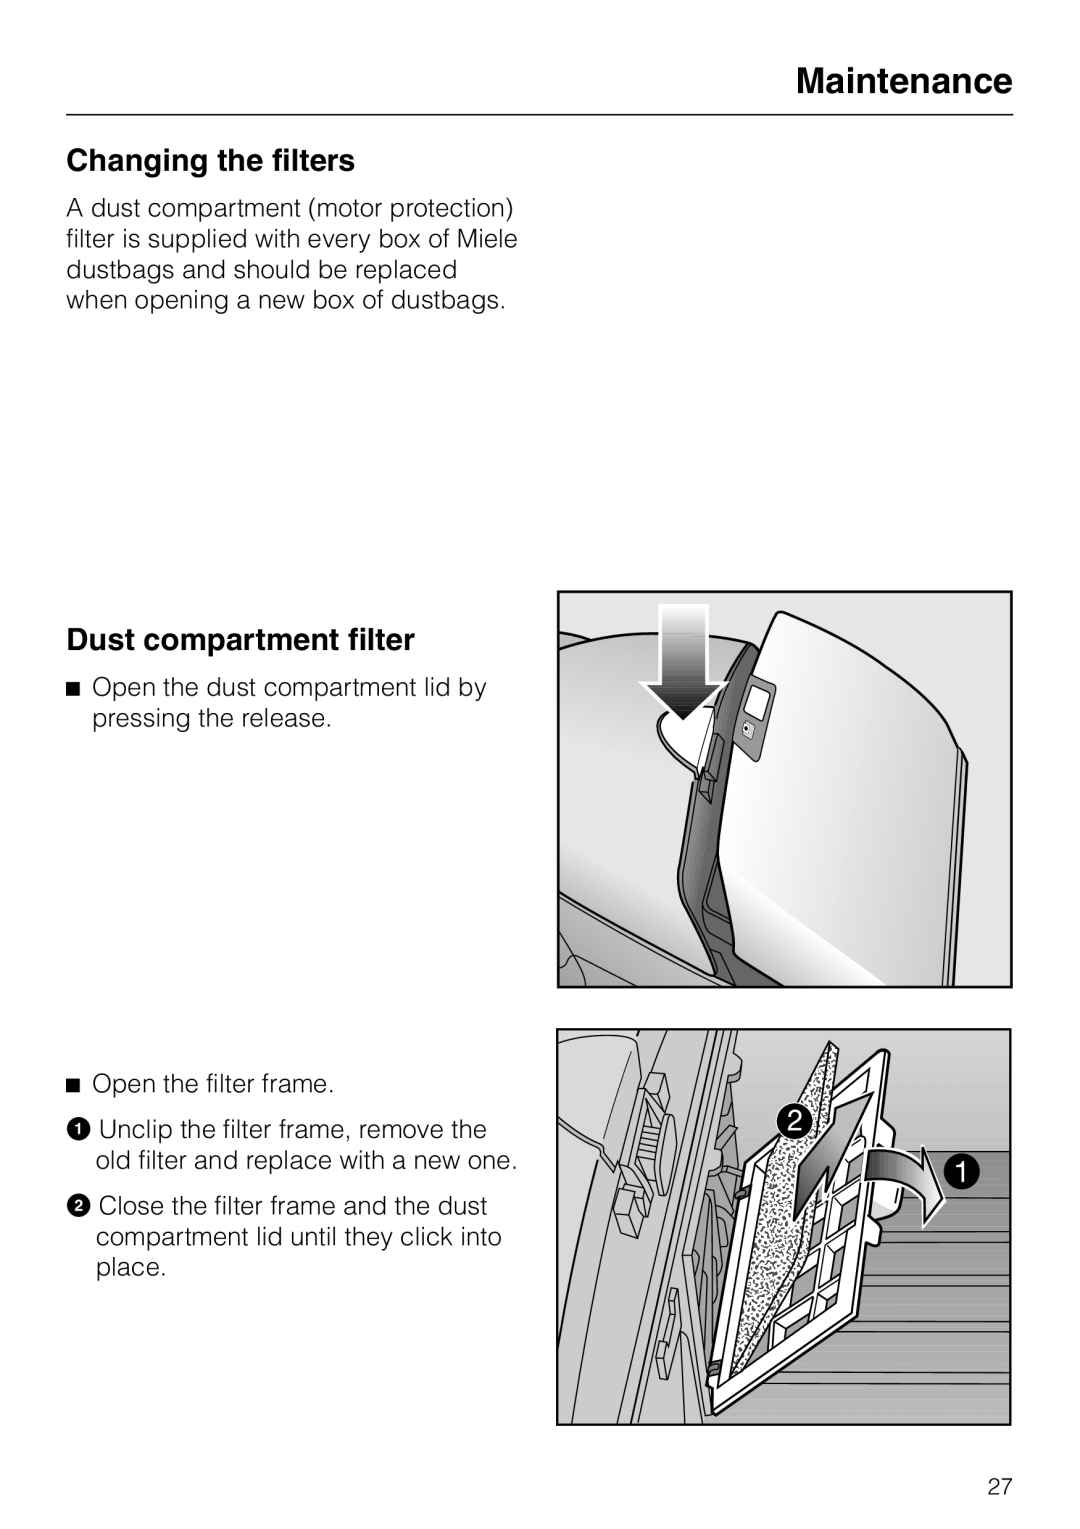 Miele HS09 operating instructions Changing the filters, Dust compartment filter, Maintenance 